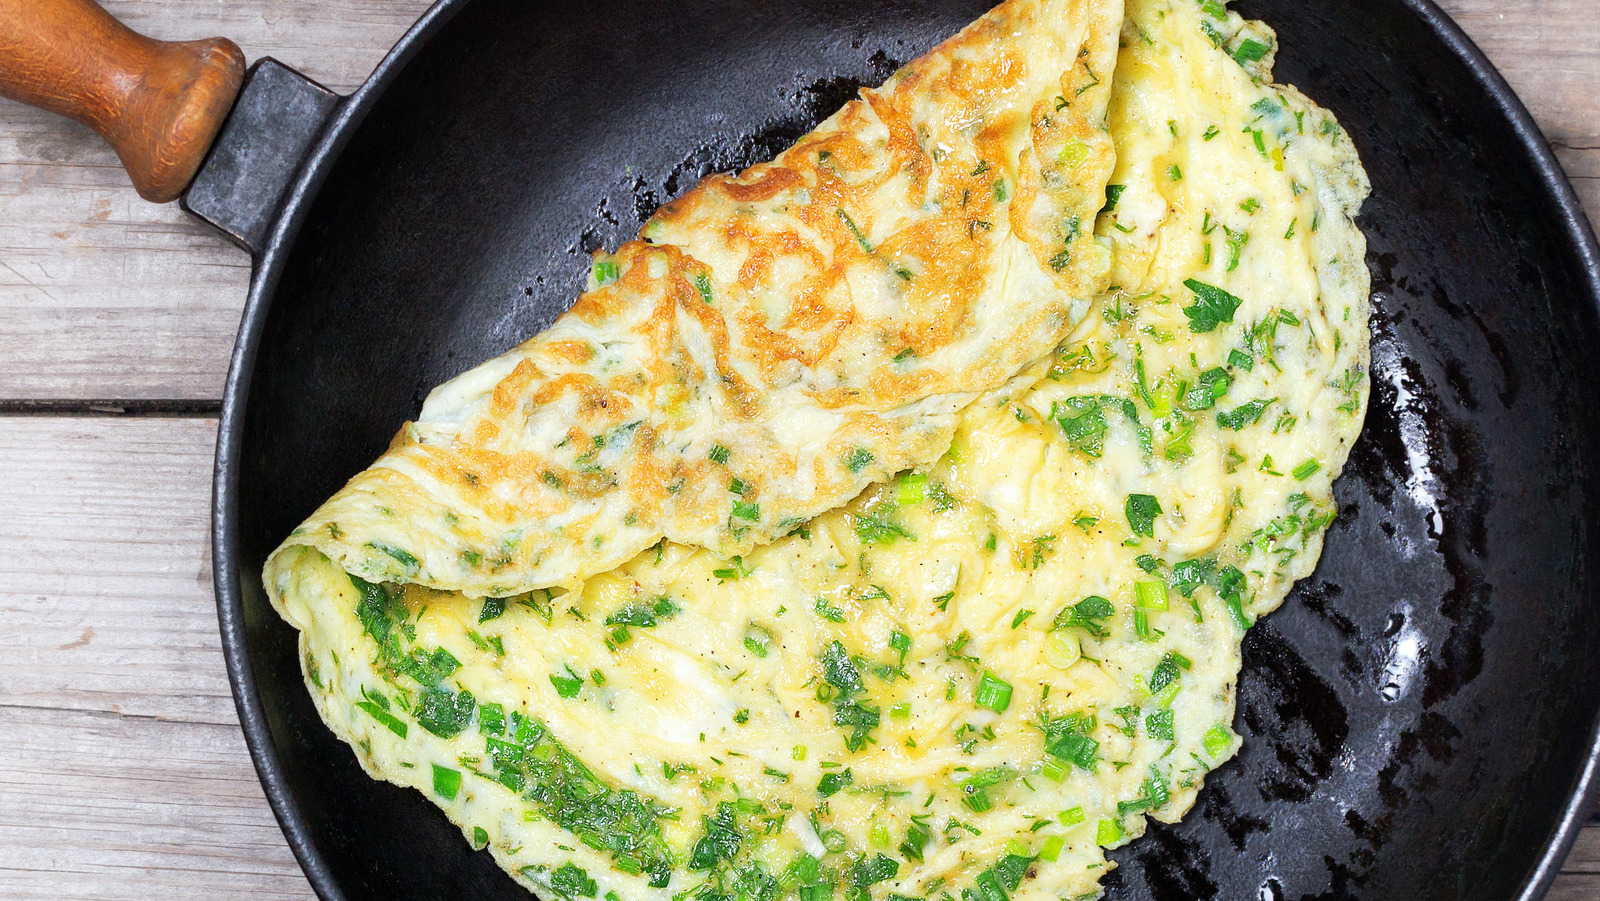 13 Tips For Making The Absolute Best Omelets